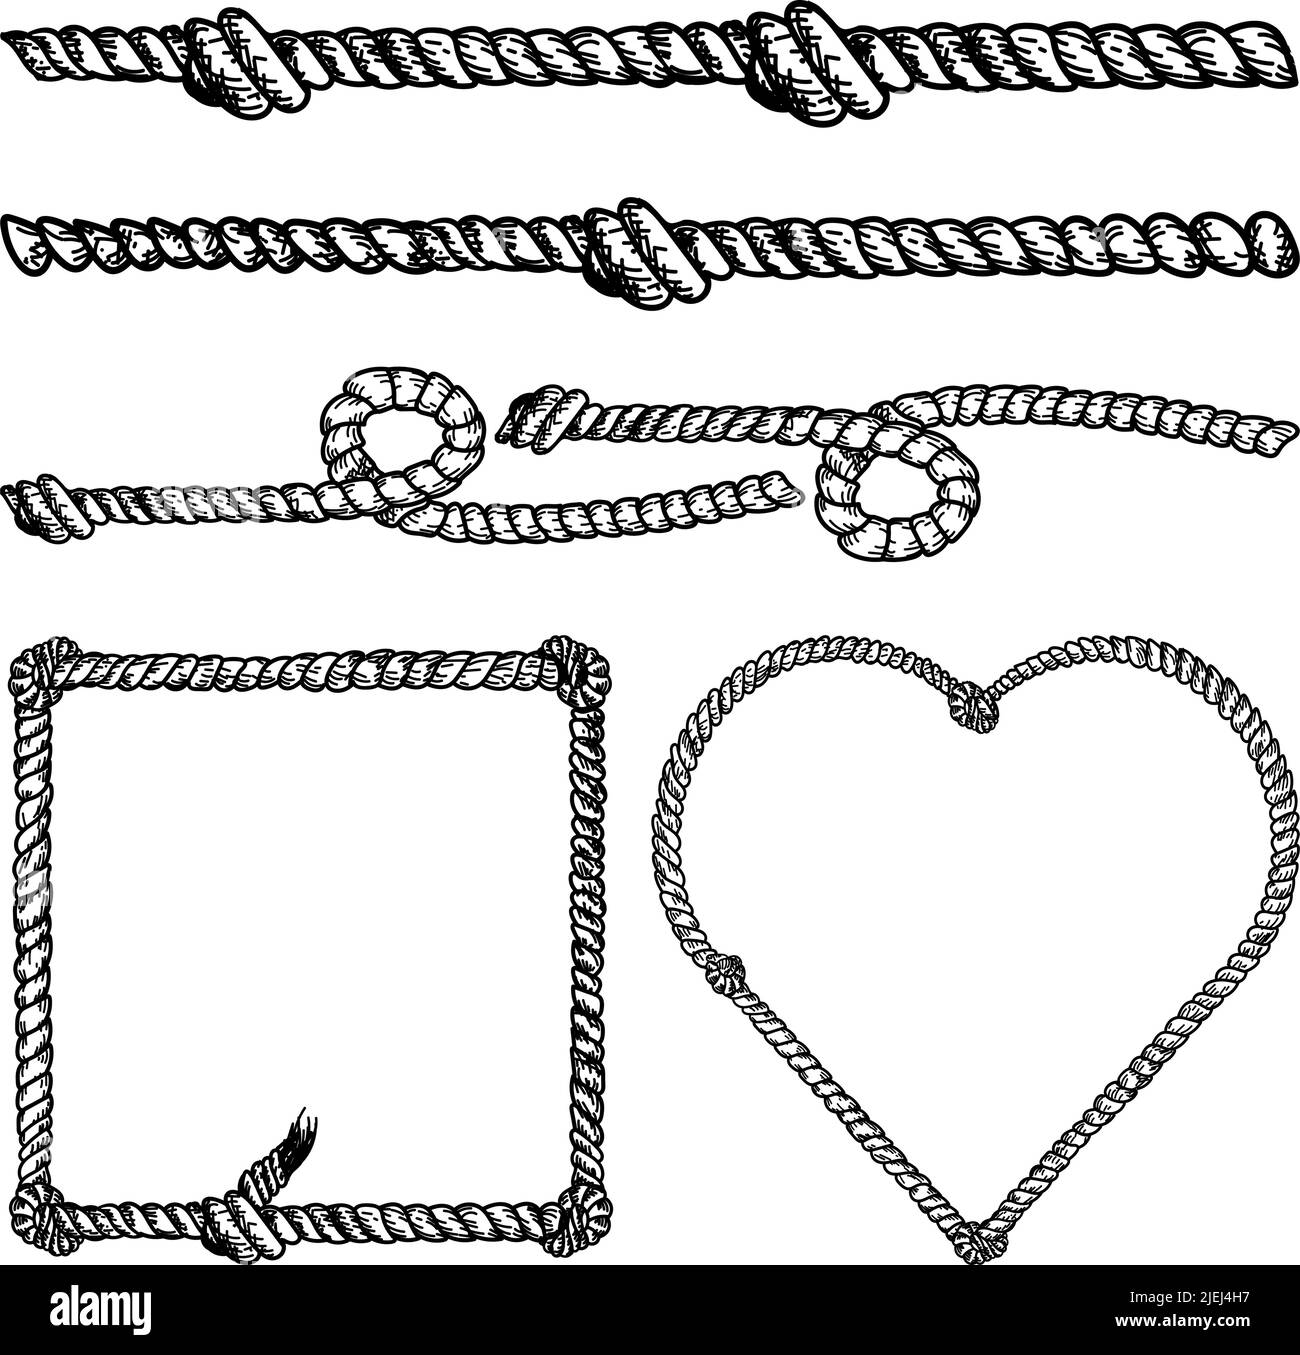 Nautical rope vector dividers and elements, hand-drawn doodle in sketch  style. Vintage border frame design illustration. Decorative nautical jute  fram Stock Vector Image & Art - Alamy